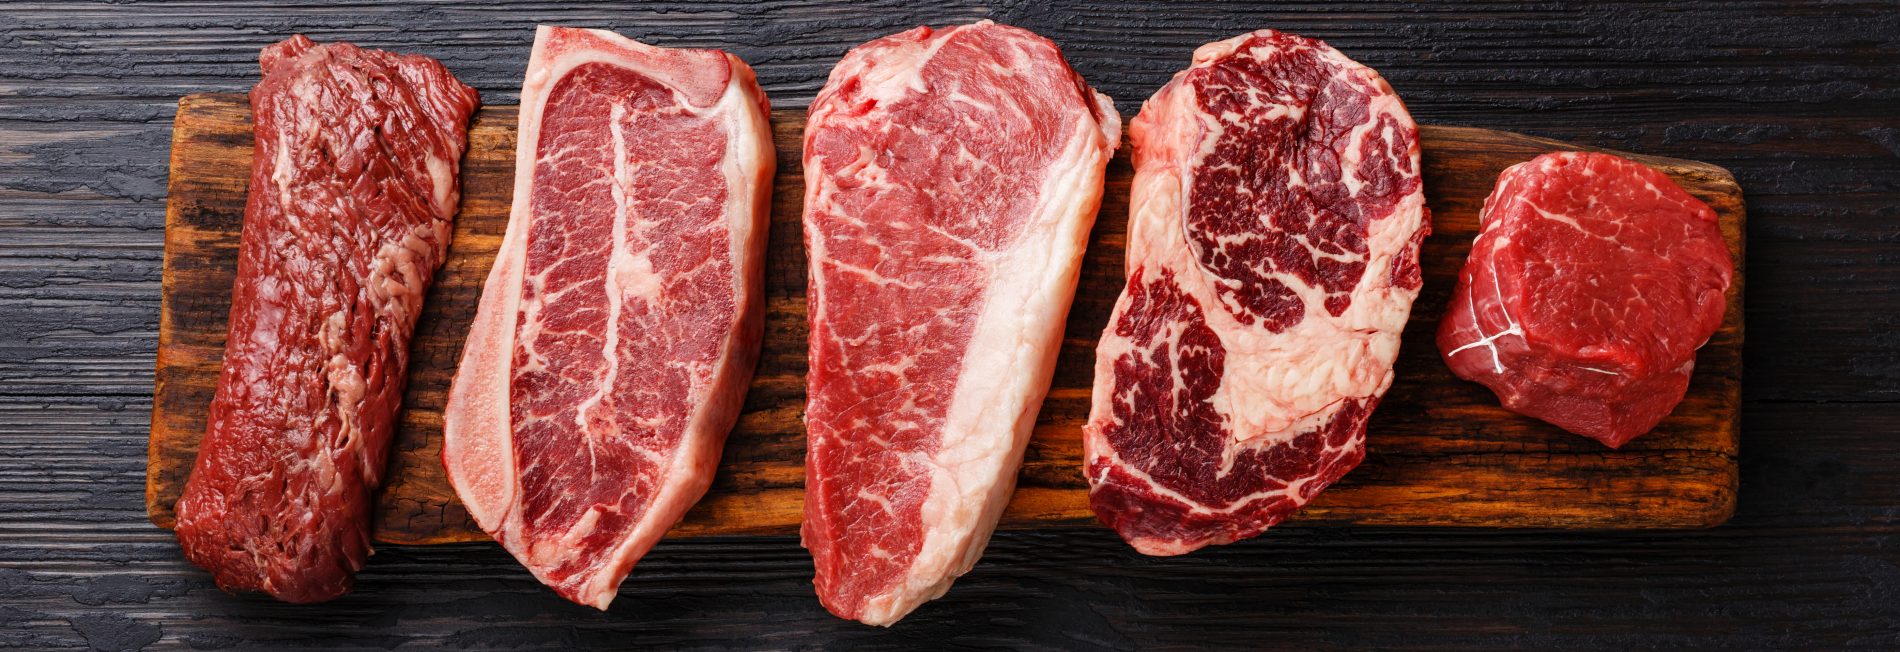 How Buying Good Quality Meat Benefits Your Health